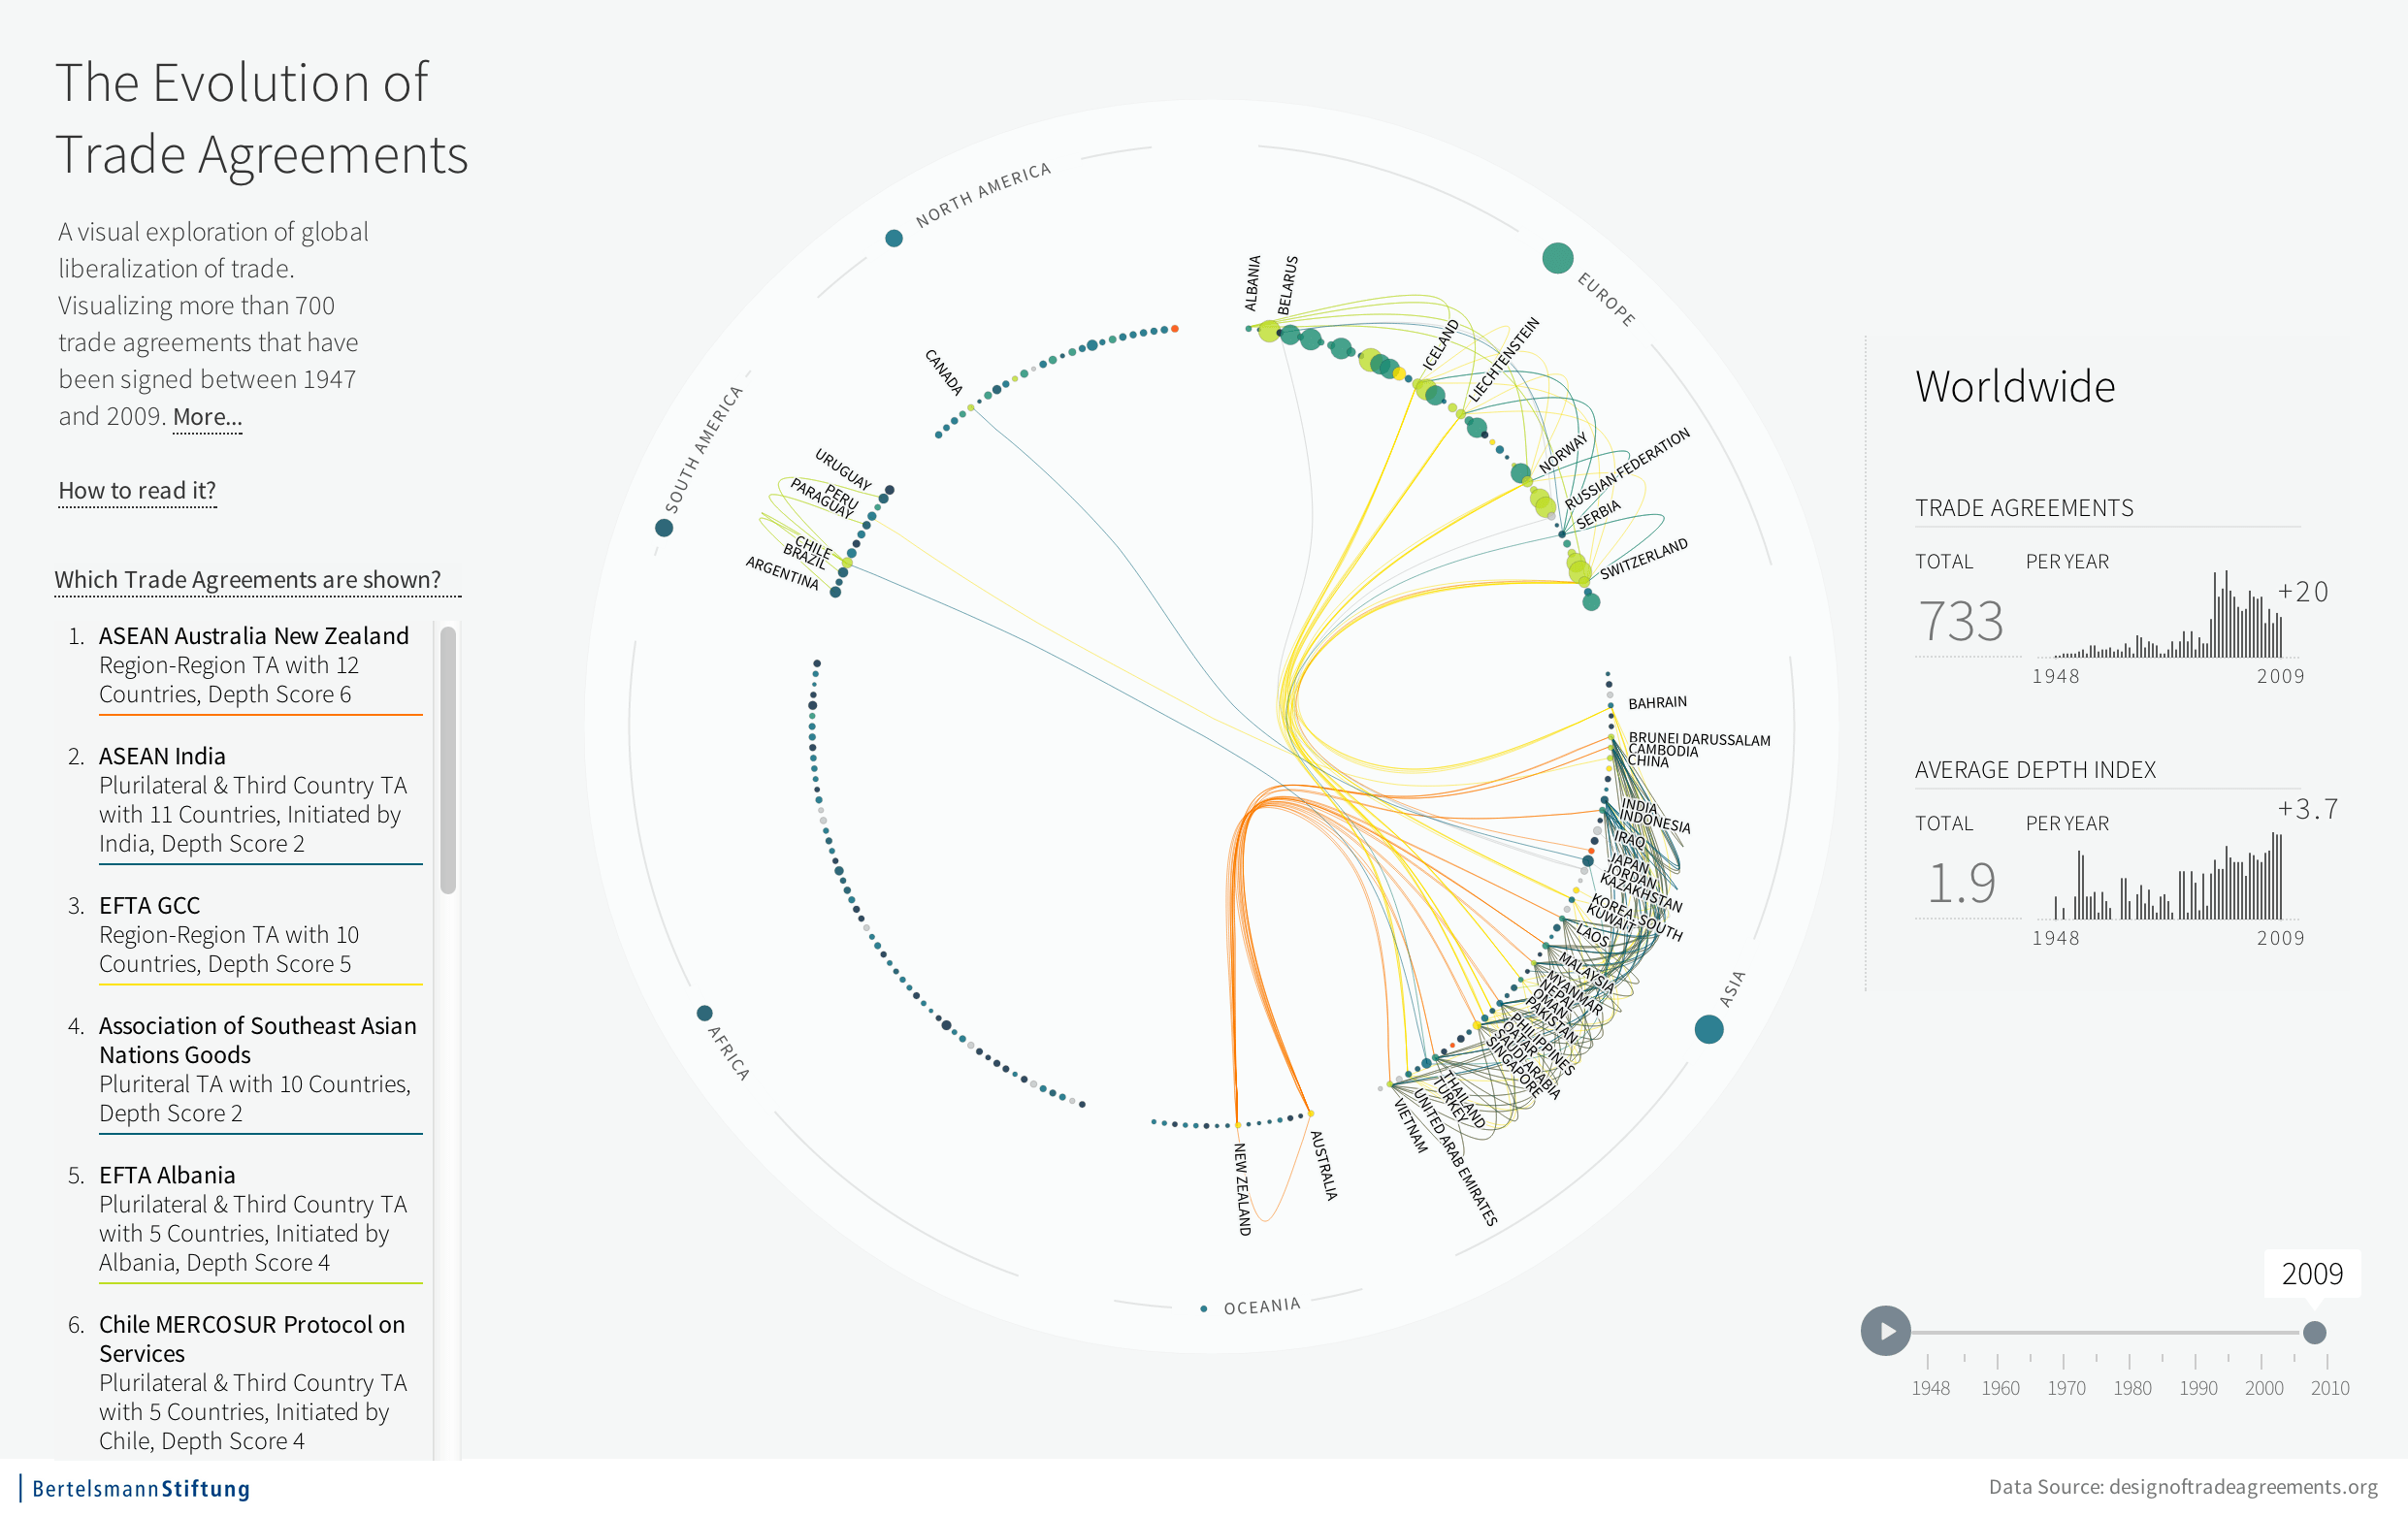 Chart visualising the Evolution of Trade Agreements